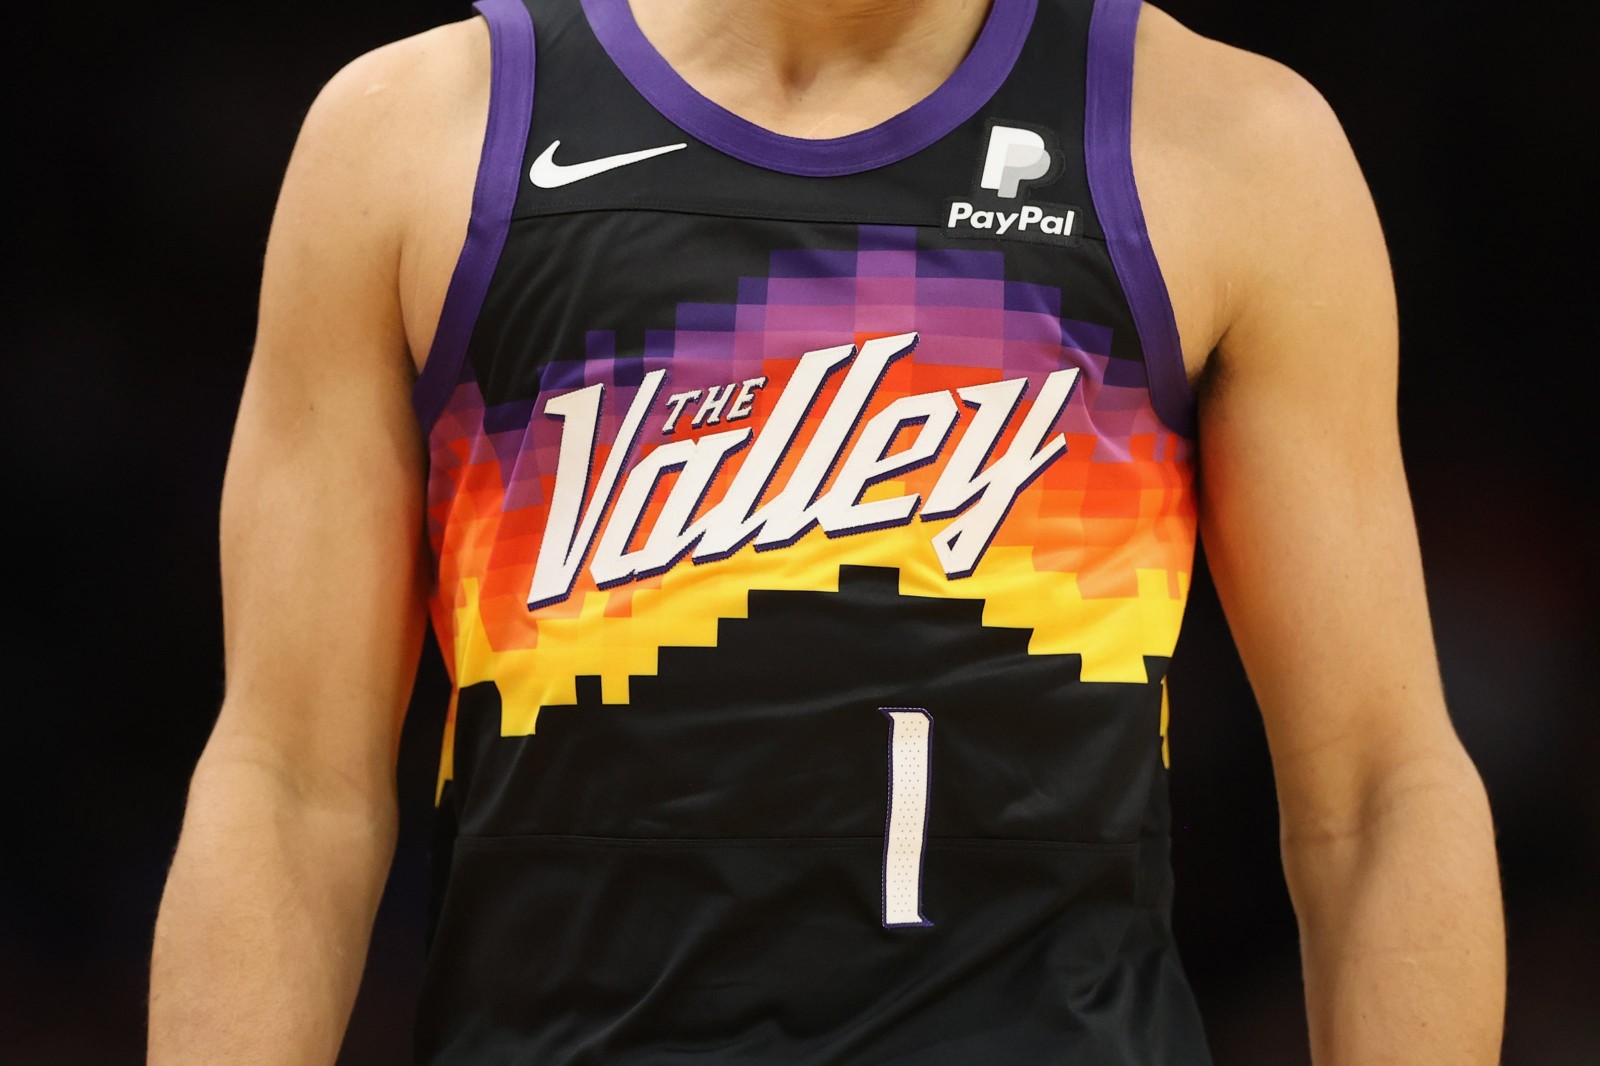 Phonix Suns Concept 2021-2022 City Edition Jersey by dyopopoy [FOR